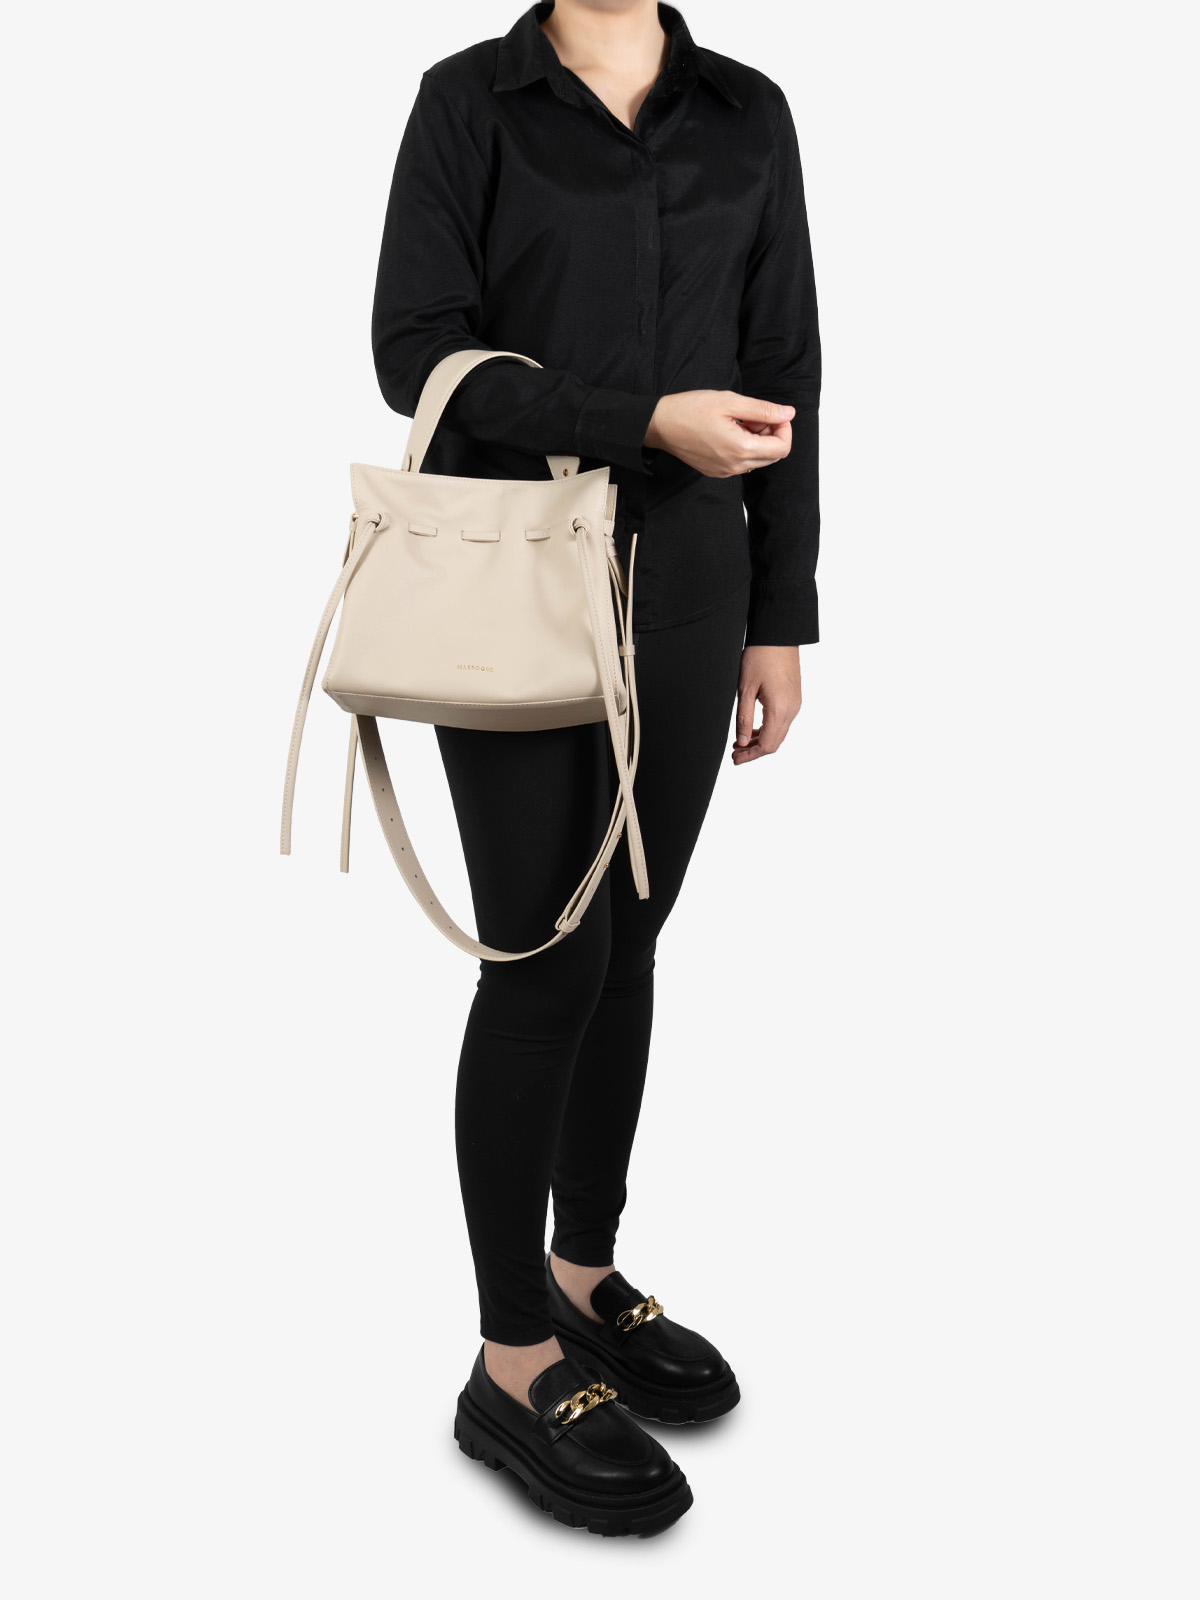 marroque-Wendy25-Daylight-leatherbag